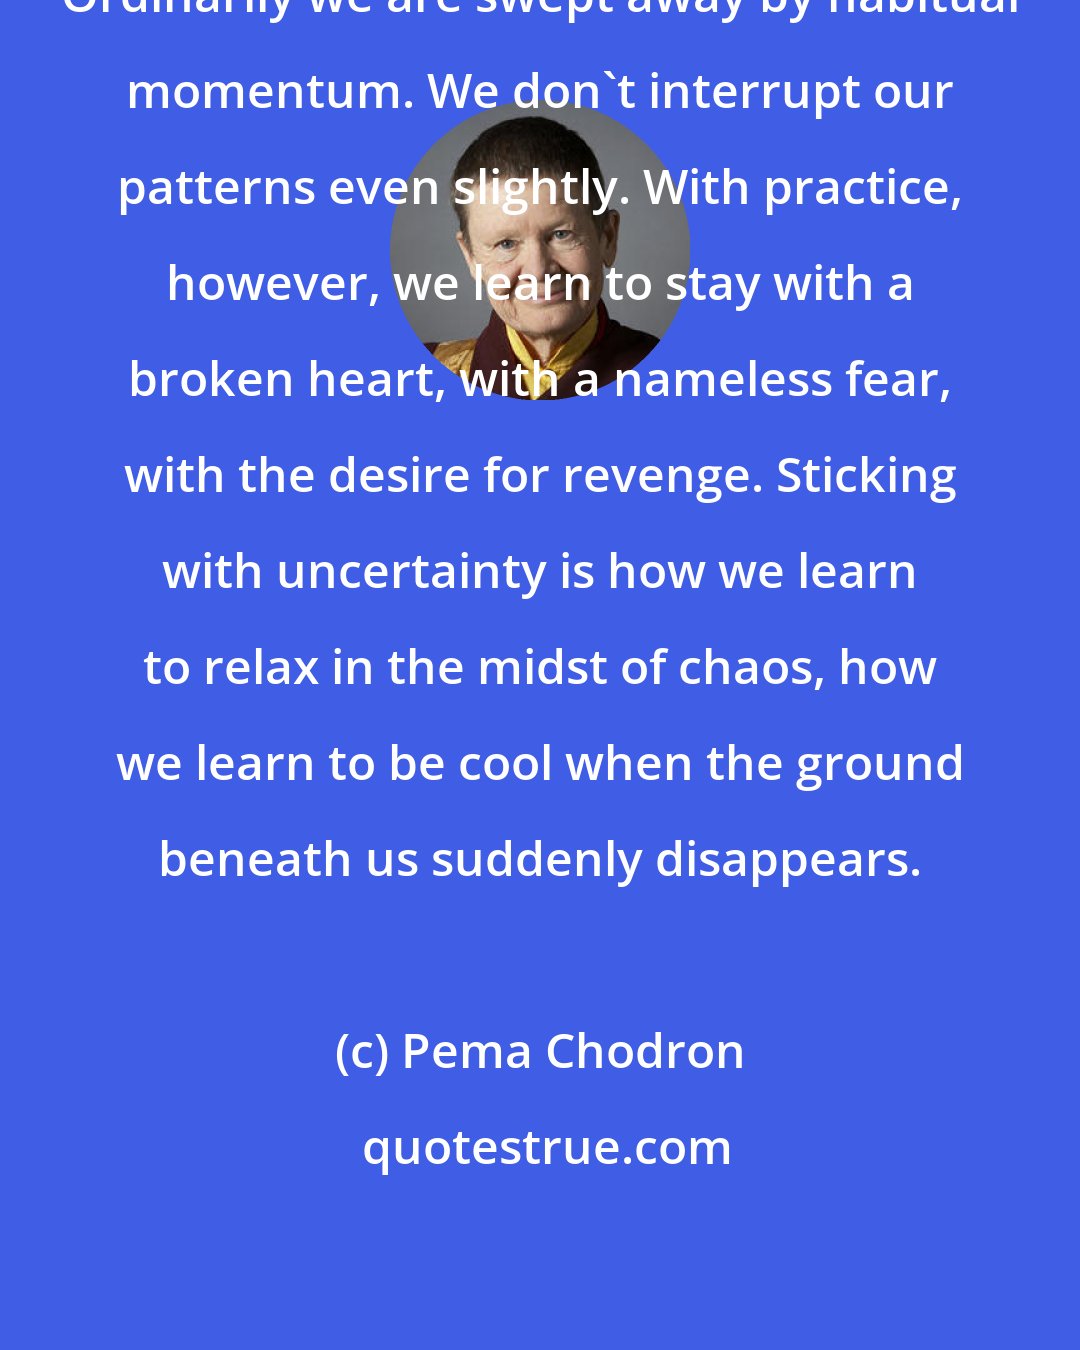 Pema Chodron: Ordinarily we are swept away by habitual momentum. We don't interrupt our patterns even slightly. With practice, however, we learn to stay with a broken heart, with a nameless fear, with the desire for revenge. Sticking with uncertainty is how we learn to relax in the midst of chaos, how we learn to be cool when the ground beneath us suddenly disappears.